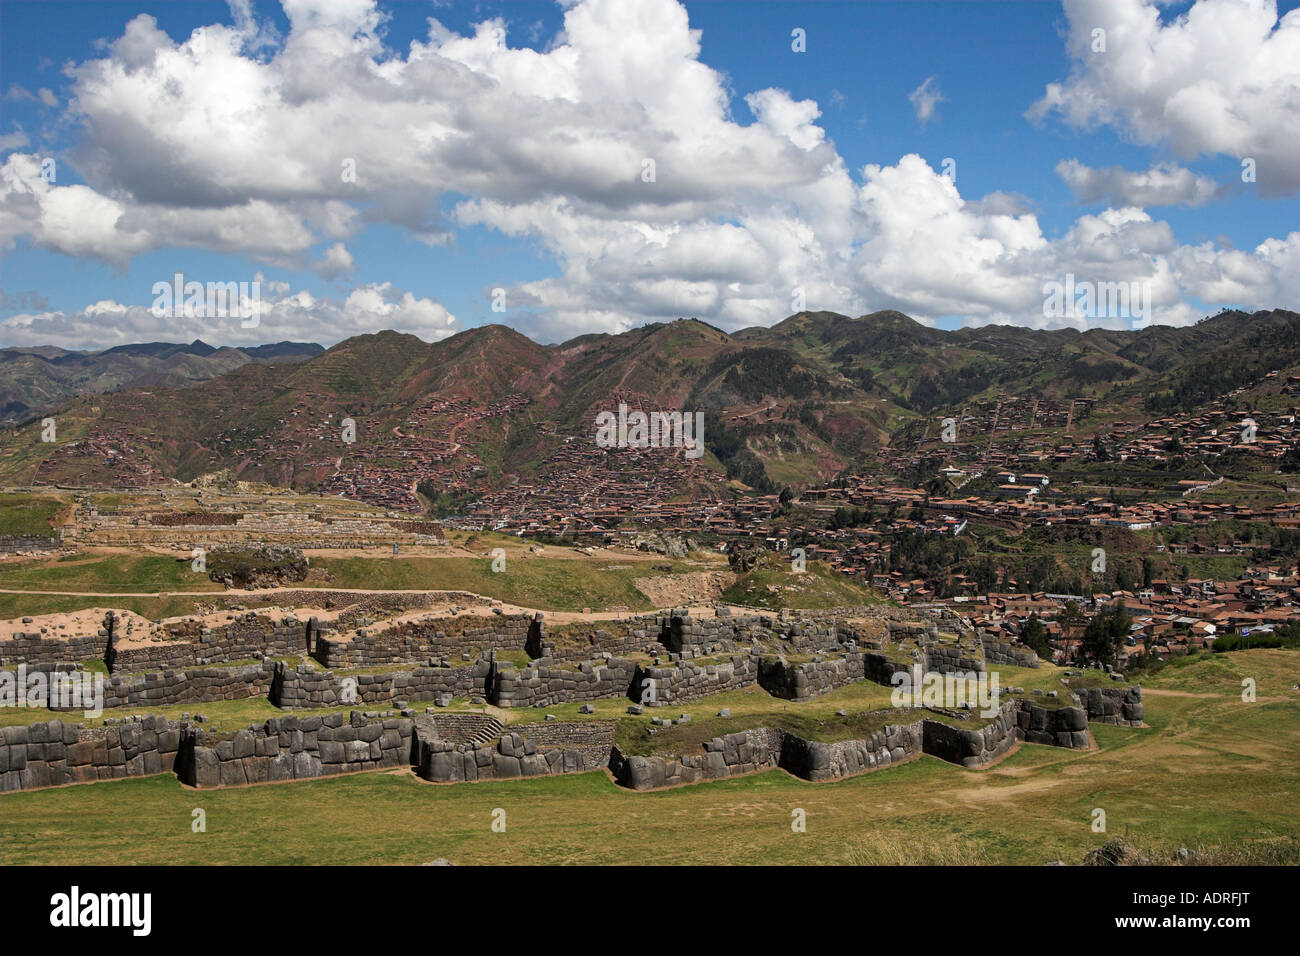 Sacsayhuaman Inca ruins, ancient fortress and Andes Mountains, Cusco (Cuzco), Peru, "South America" Stock Photo